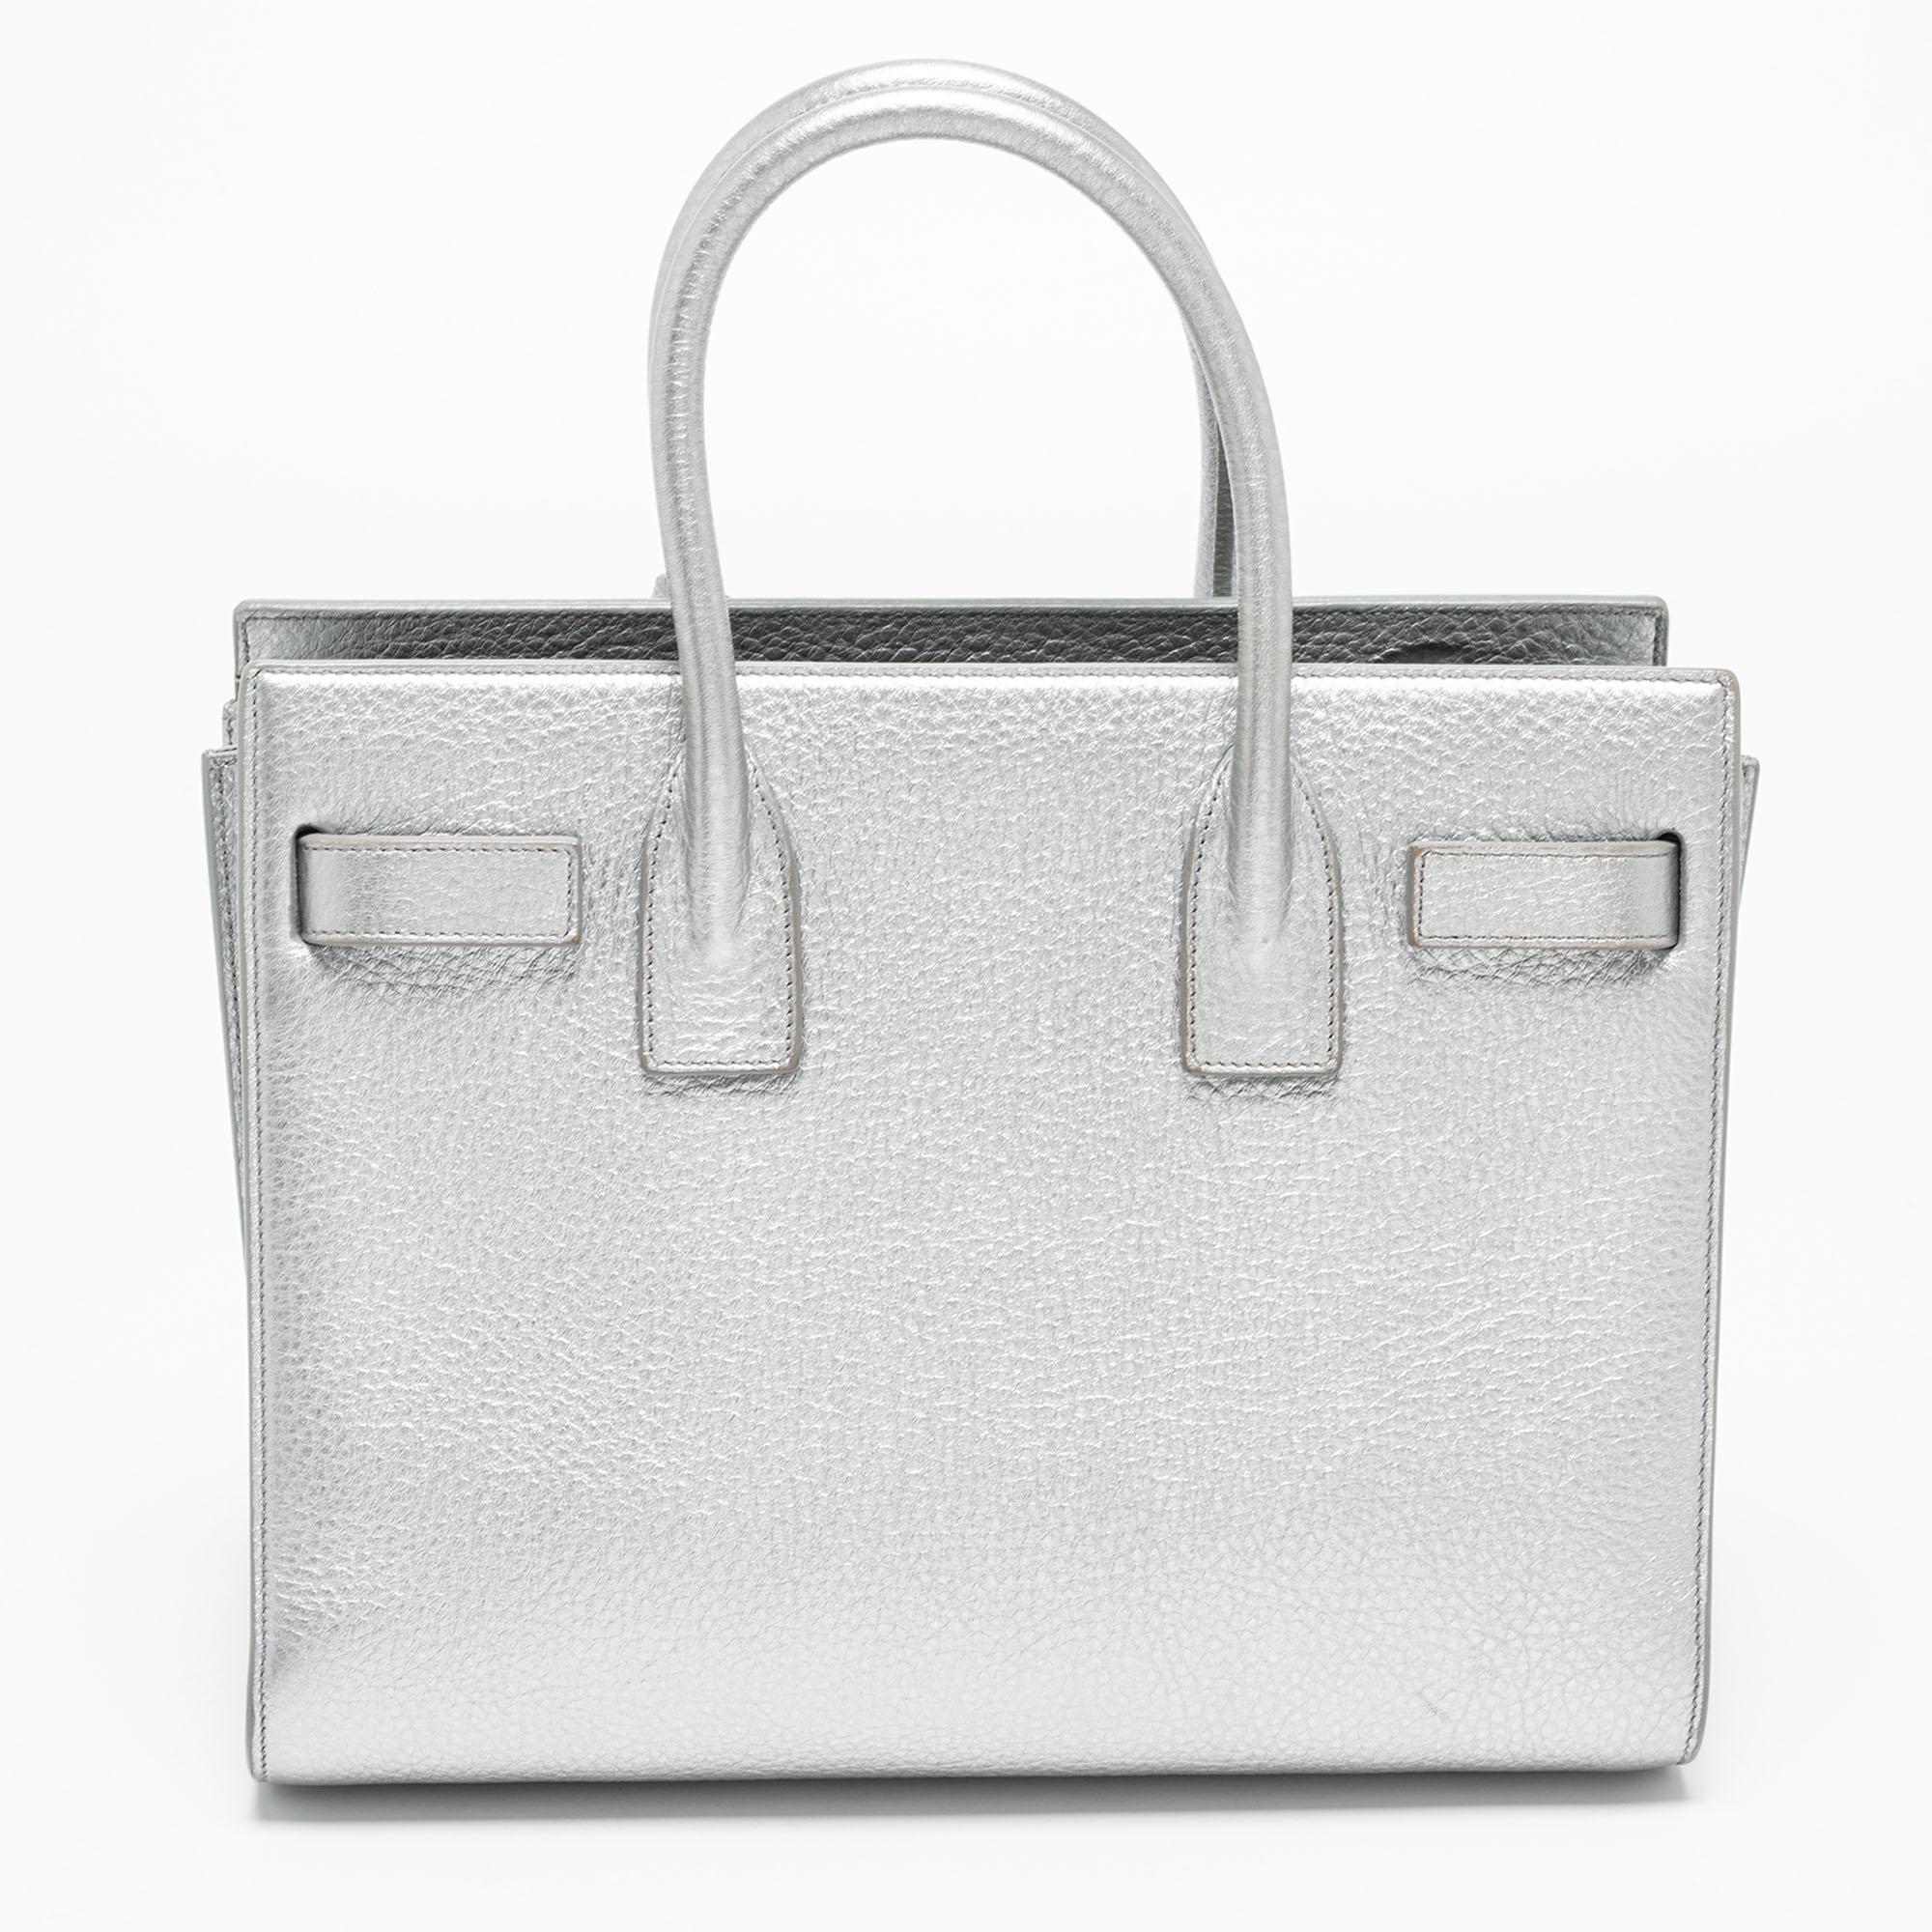 From Saint Laurent, this Baby Classic Sac De Jour tote is designed to offer complete essentiality, luxury, and style. Its structured silhouette is made from and accentuated with dual handles and silver-toned hardware. It accommodates a leather-lined